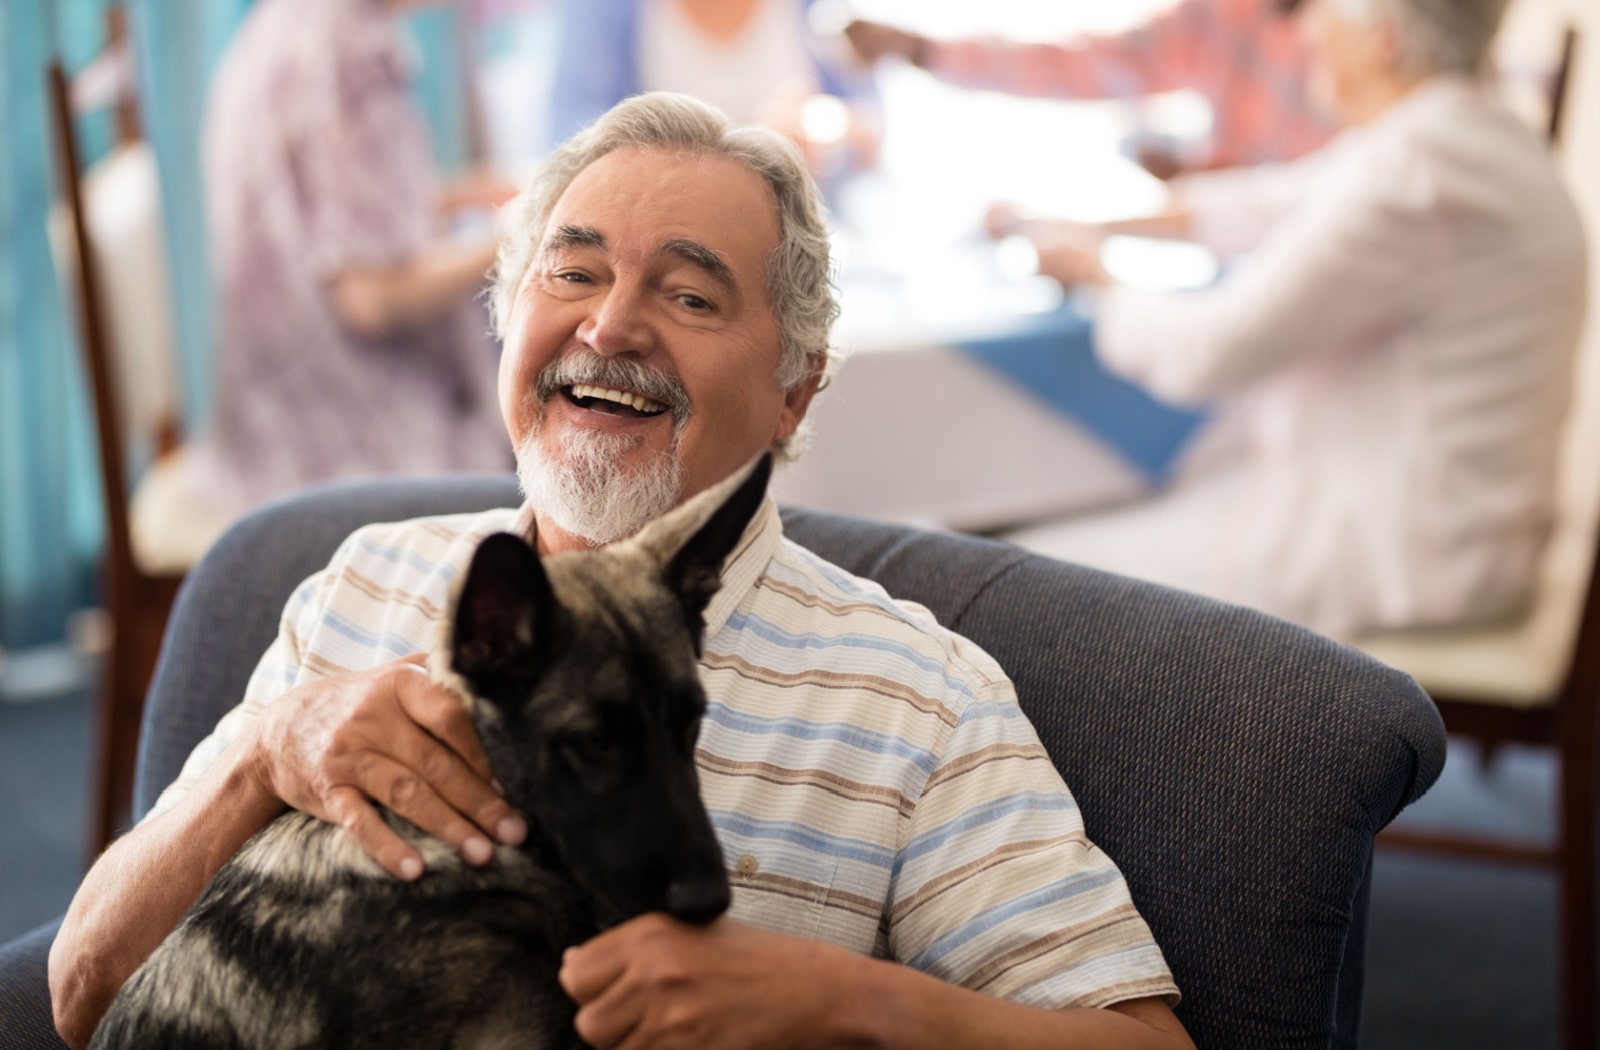 An assisted living resident sitting in a chair and petting a dog that is sitting on his lap